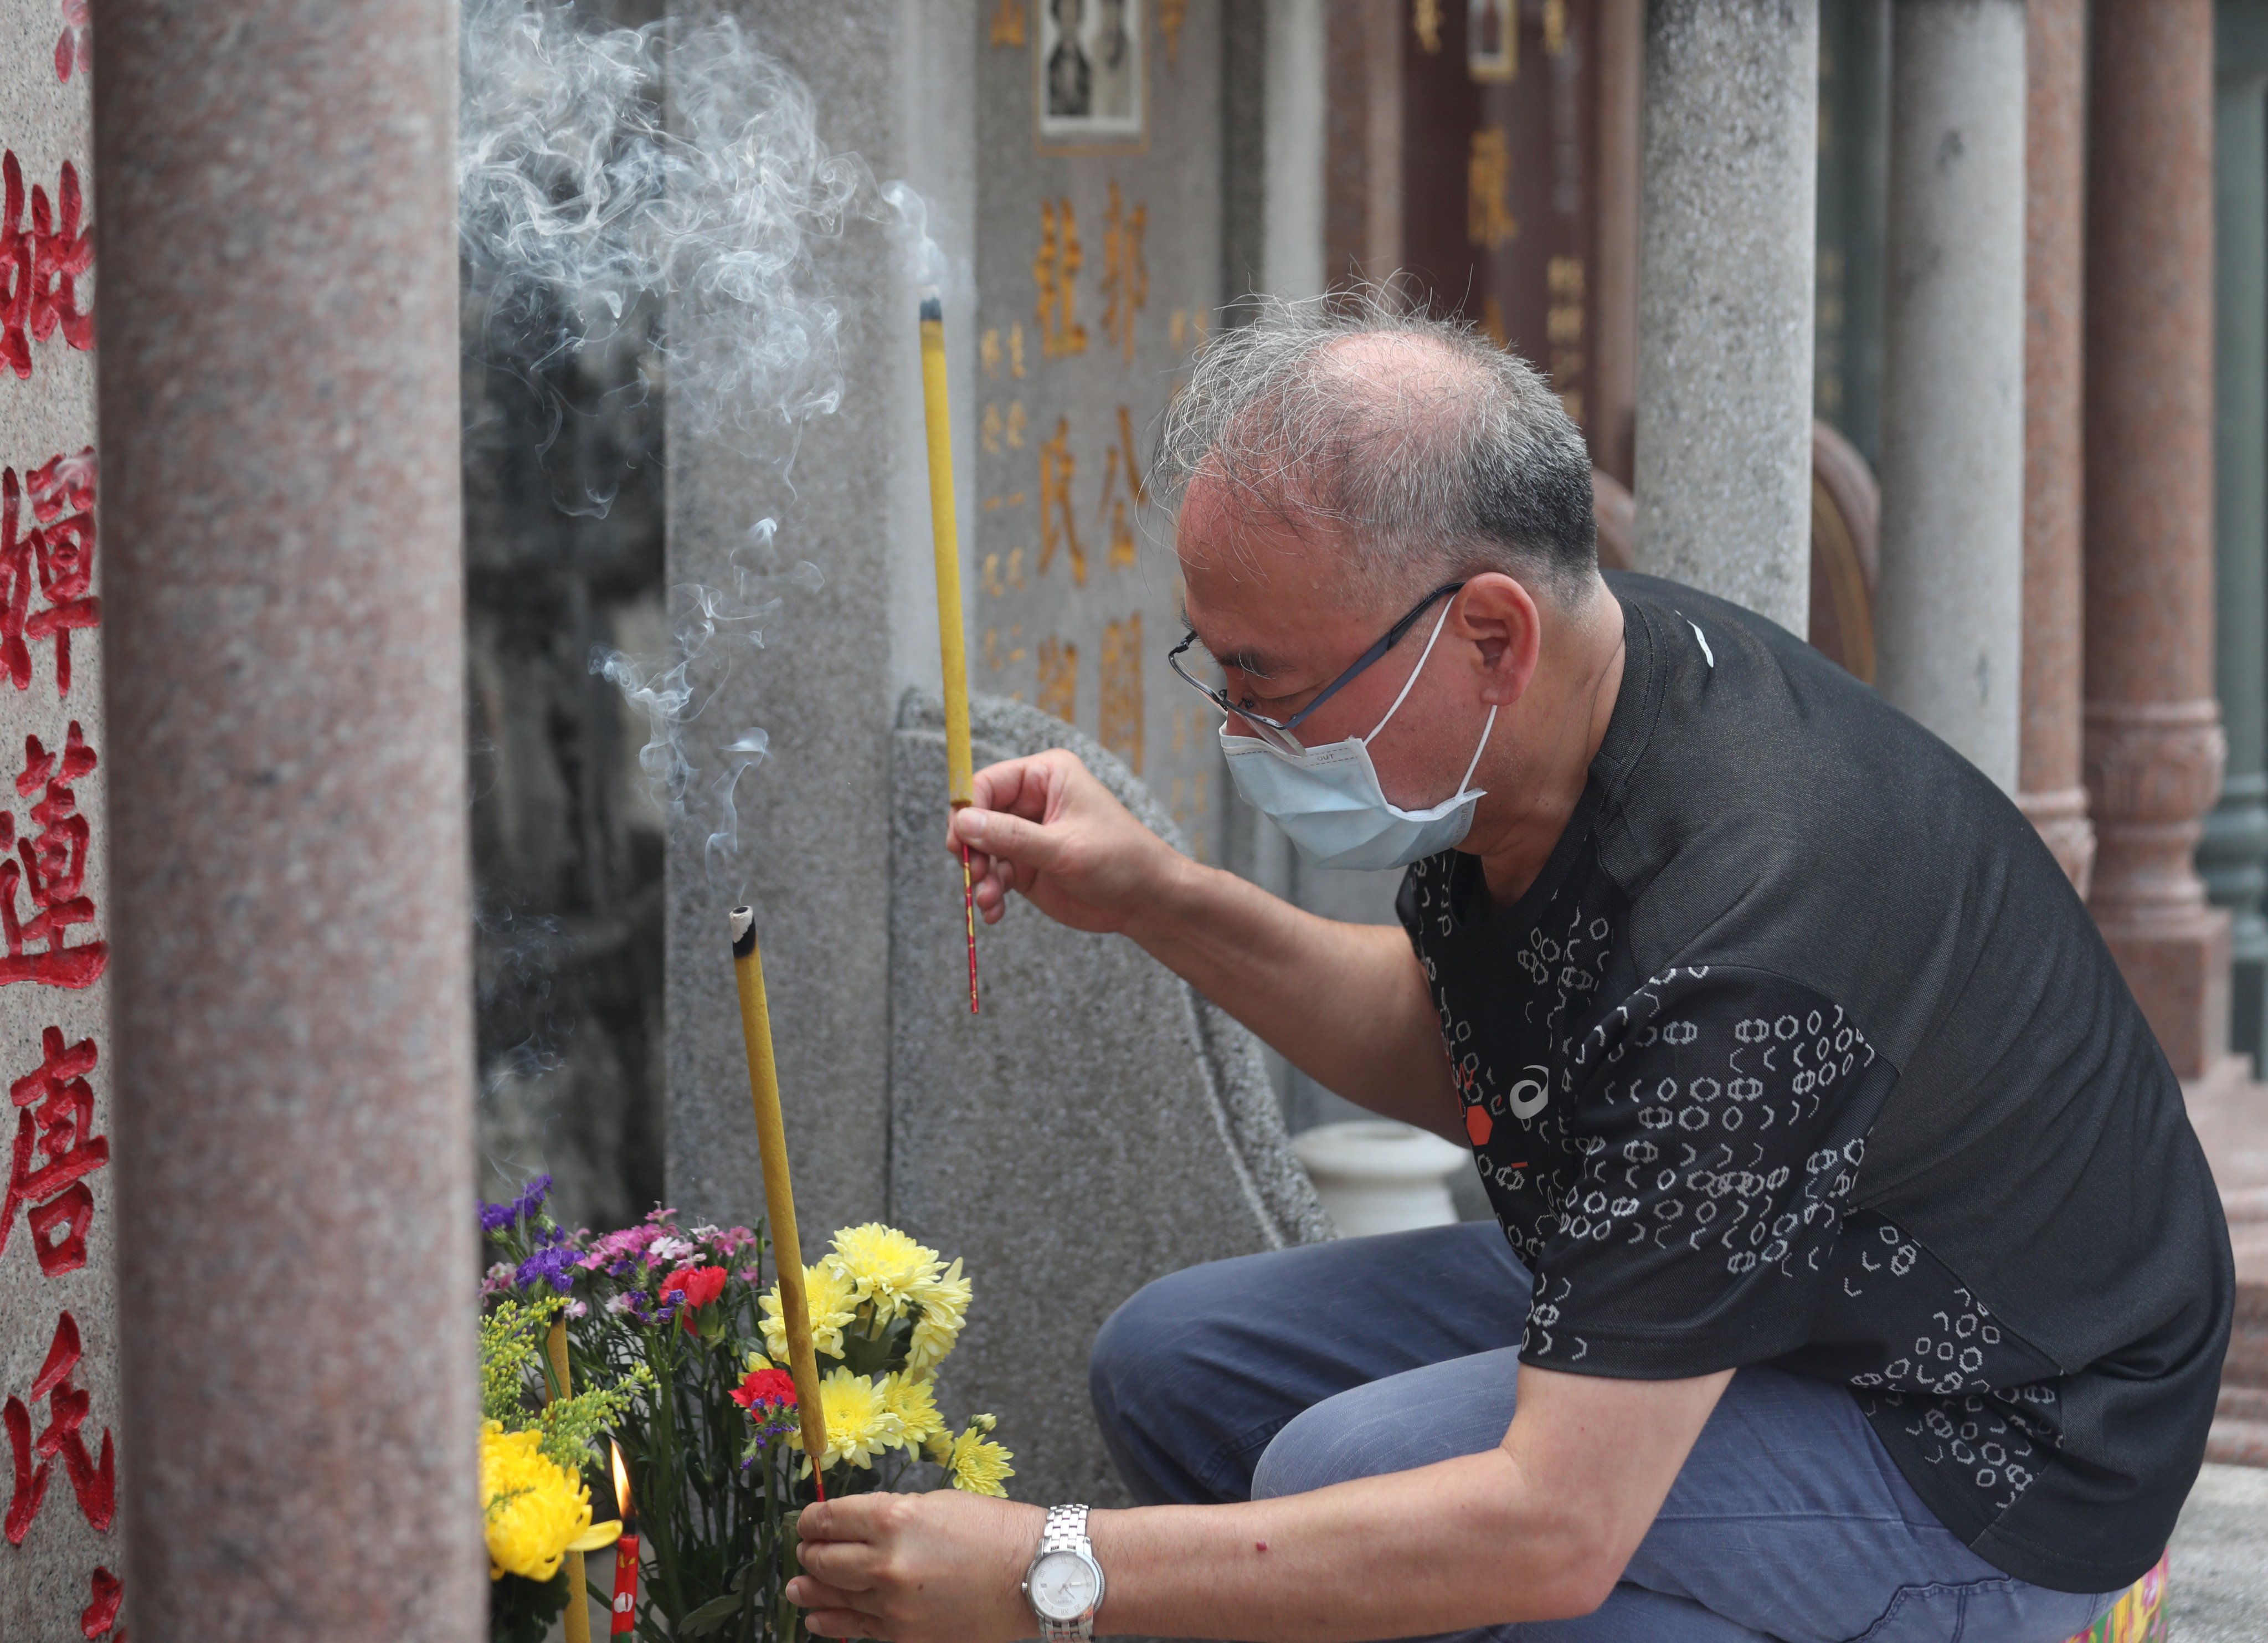 A man lights incense to pay respects to a dead relative at Chai Wan Cemetery in Hong Kong during the Ching Ming Festival. Photo: Xiaomei Chen